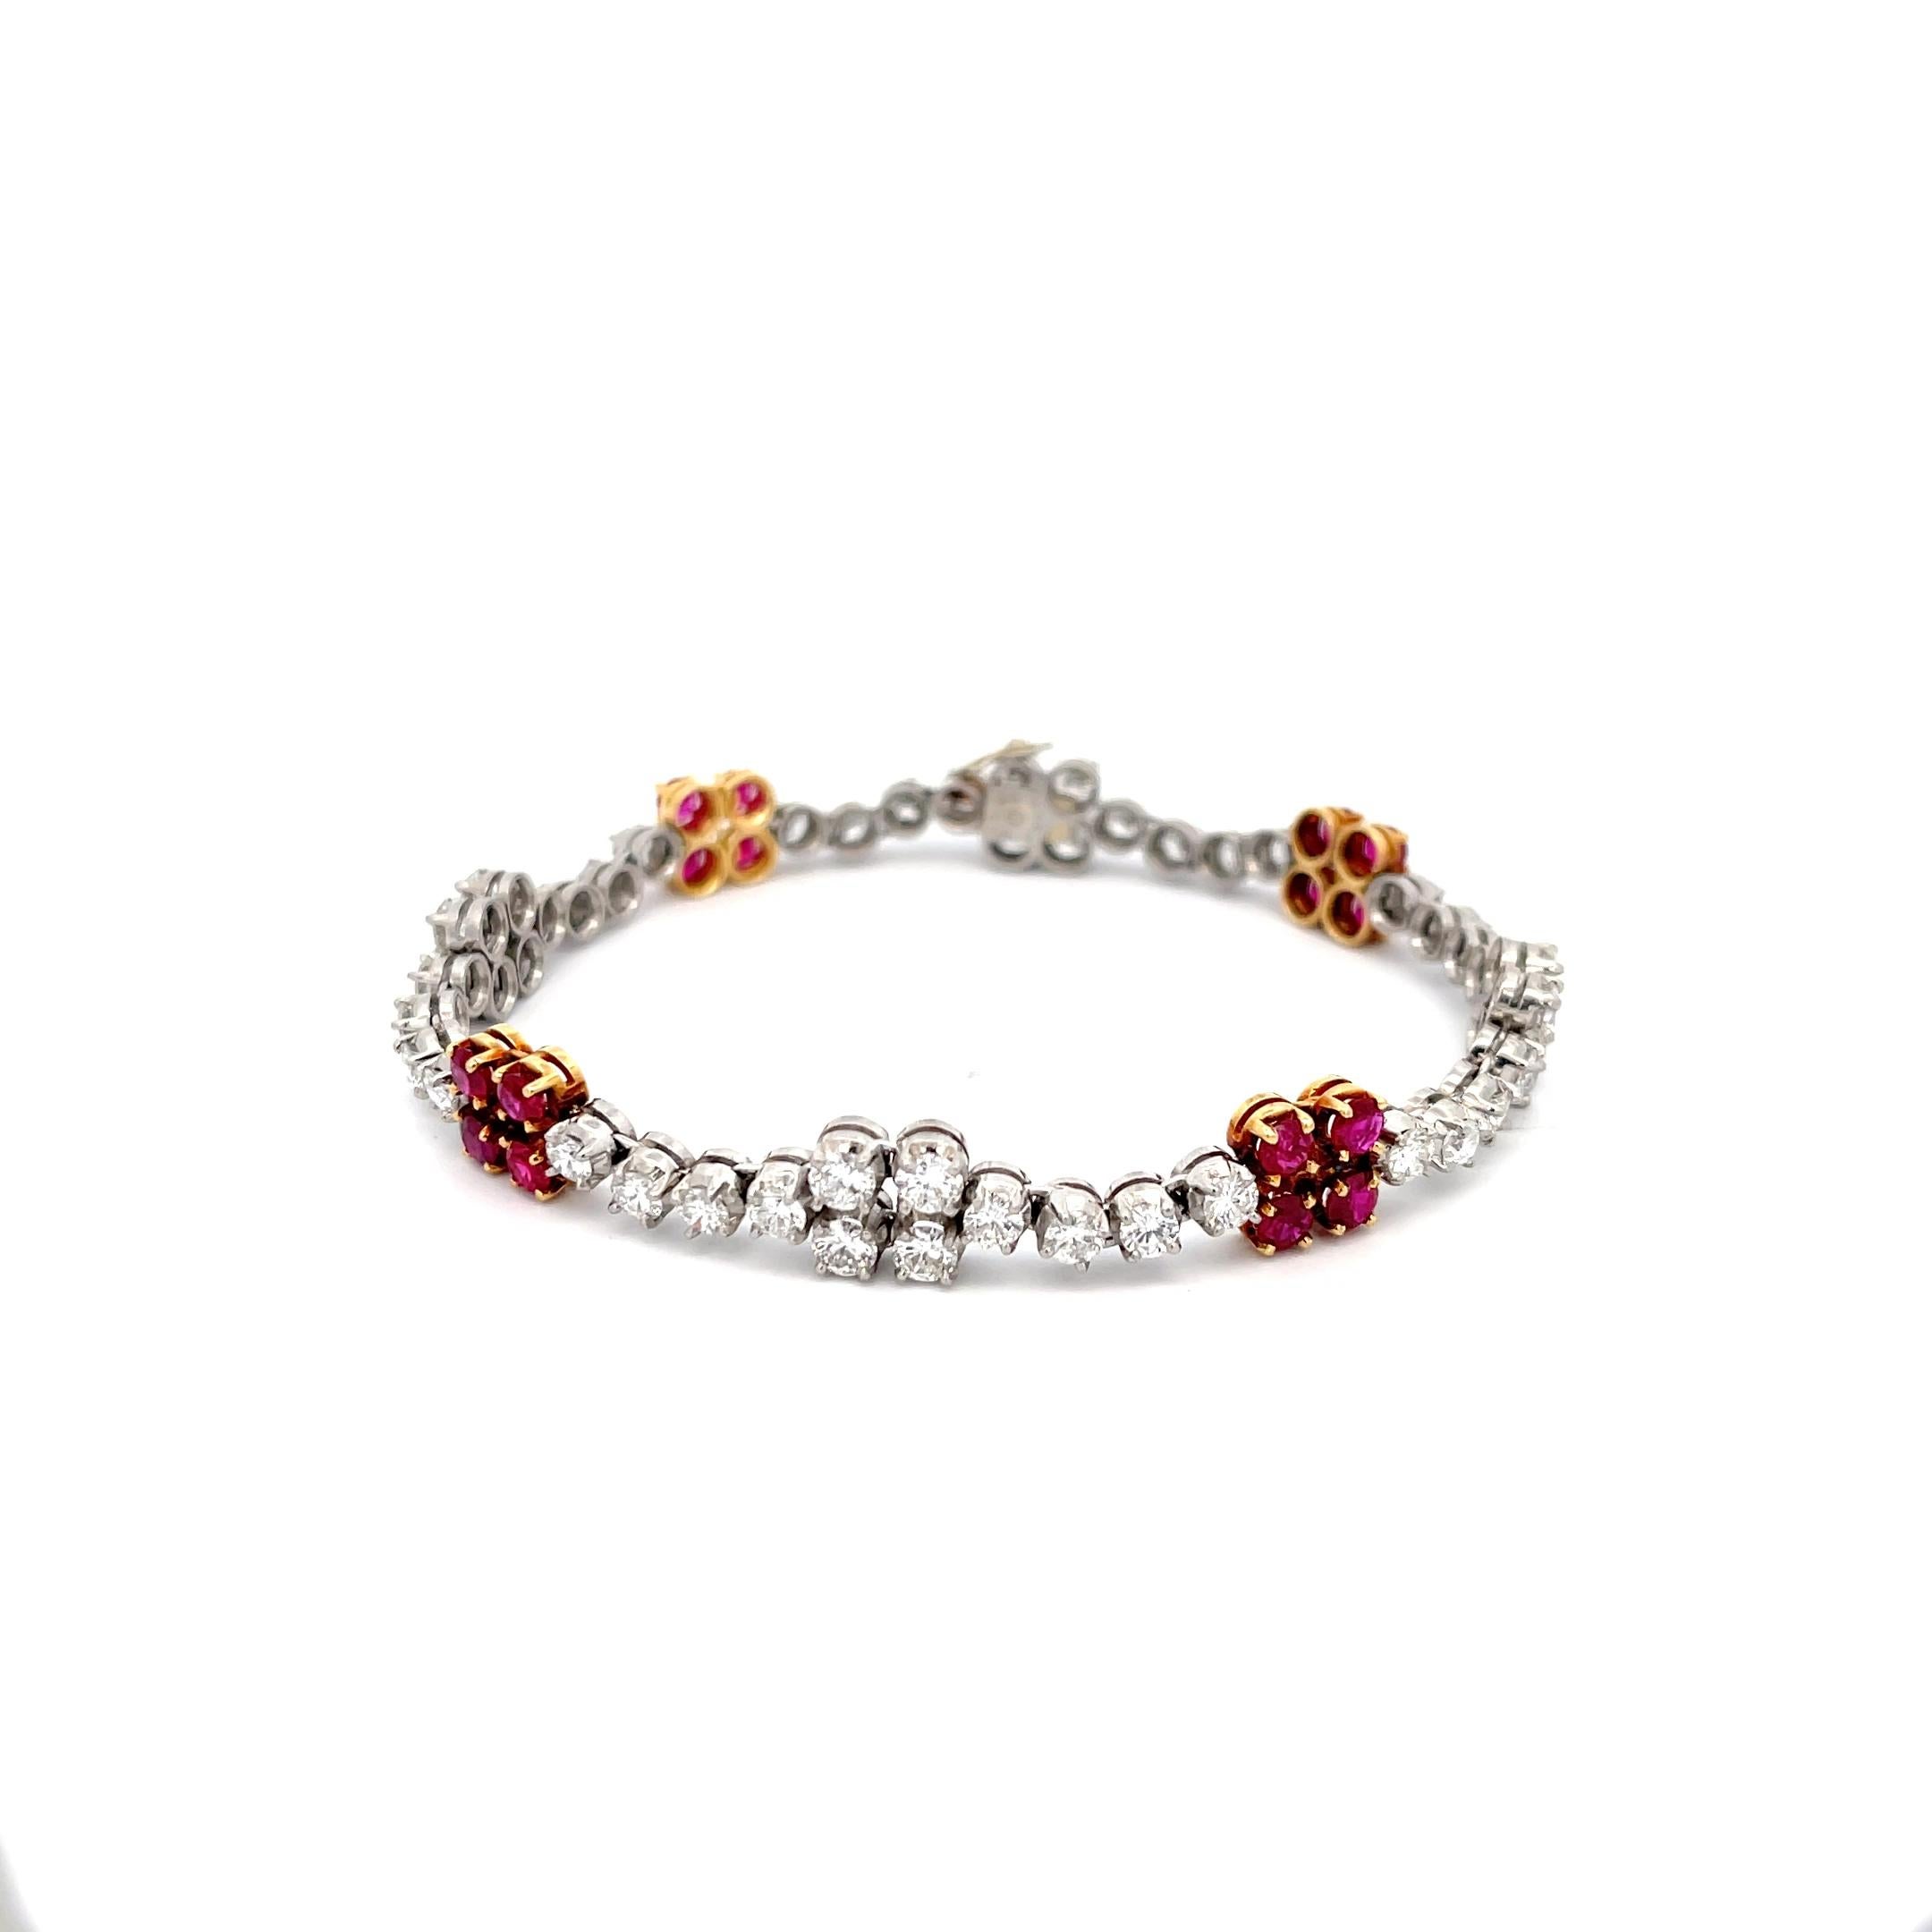 Ruby and Diamond Station Bracelet in Platinum and 18K Yellow Gold. The bracelet features approximately 2.40ctw of Rubies and 5.45ctw of Diamonds. 
7